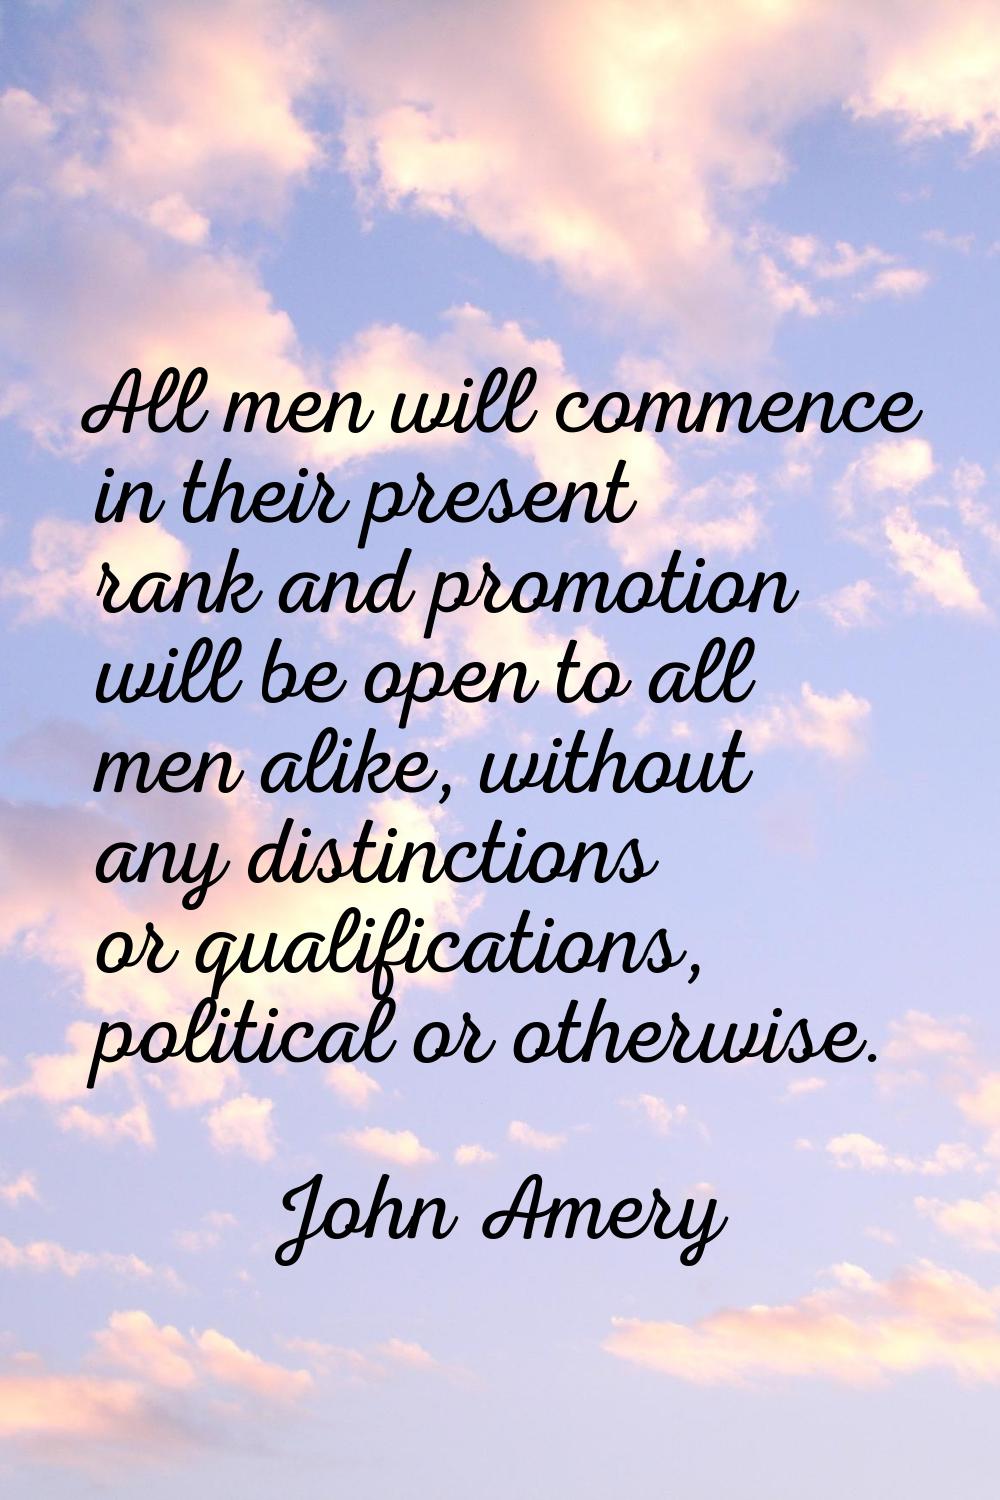 All men will commence in their present rank and promotion will be open to all men alike, without an